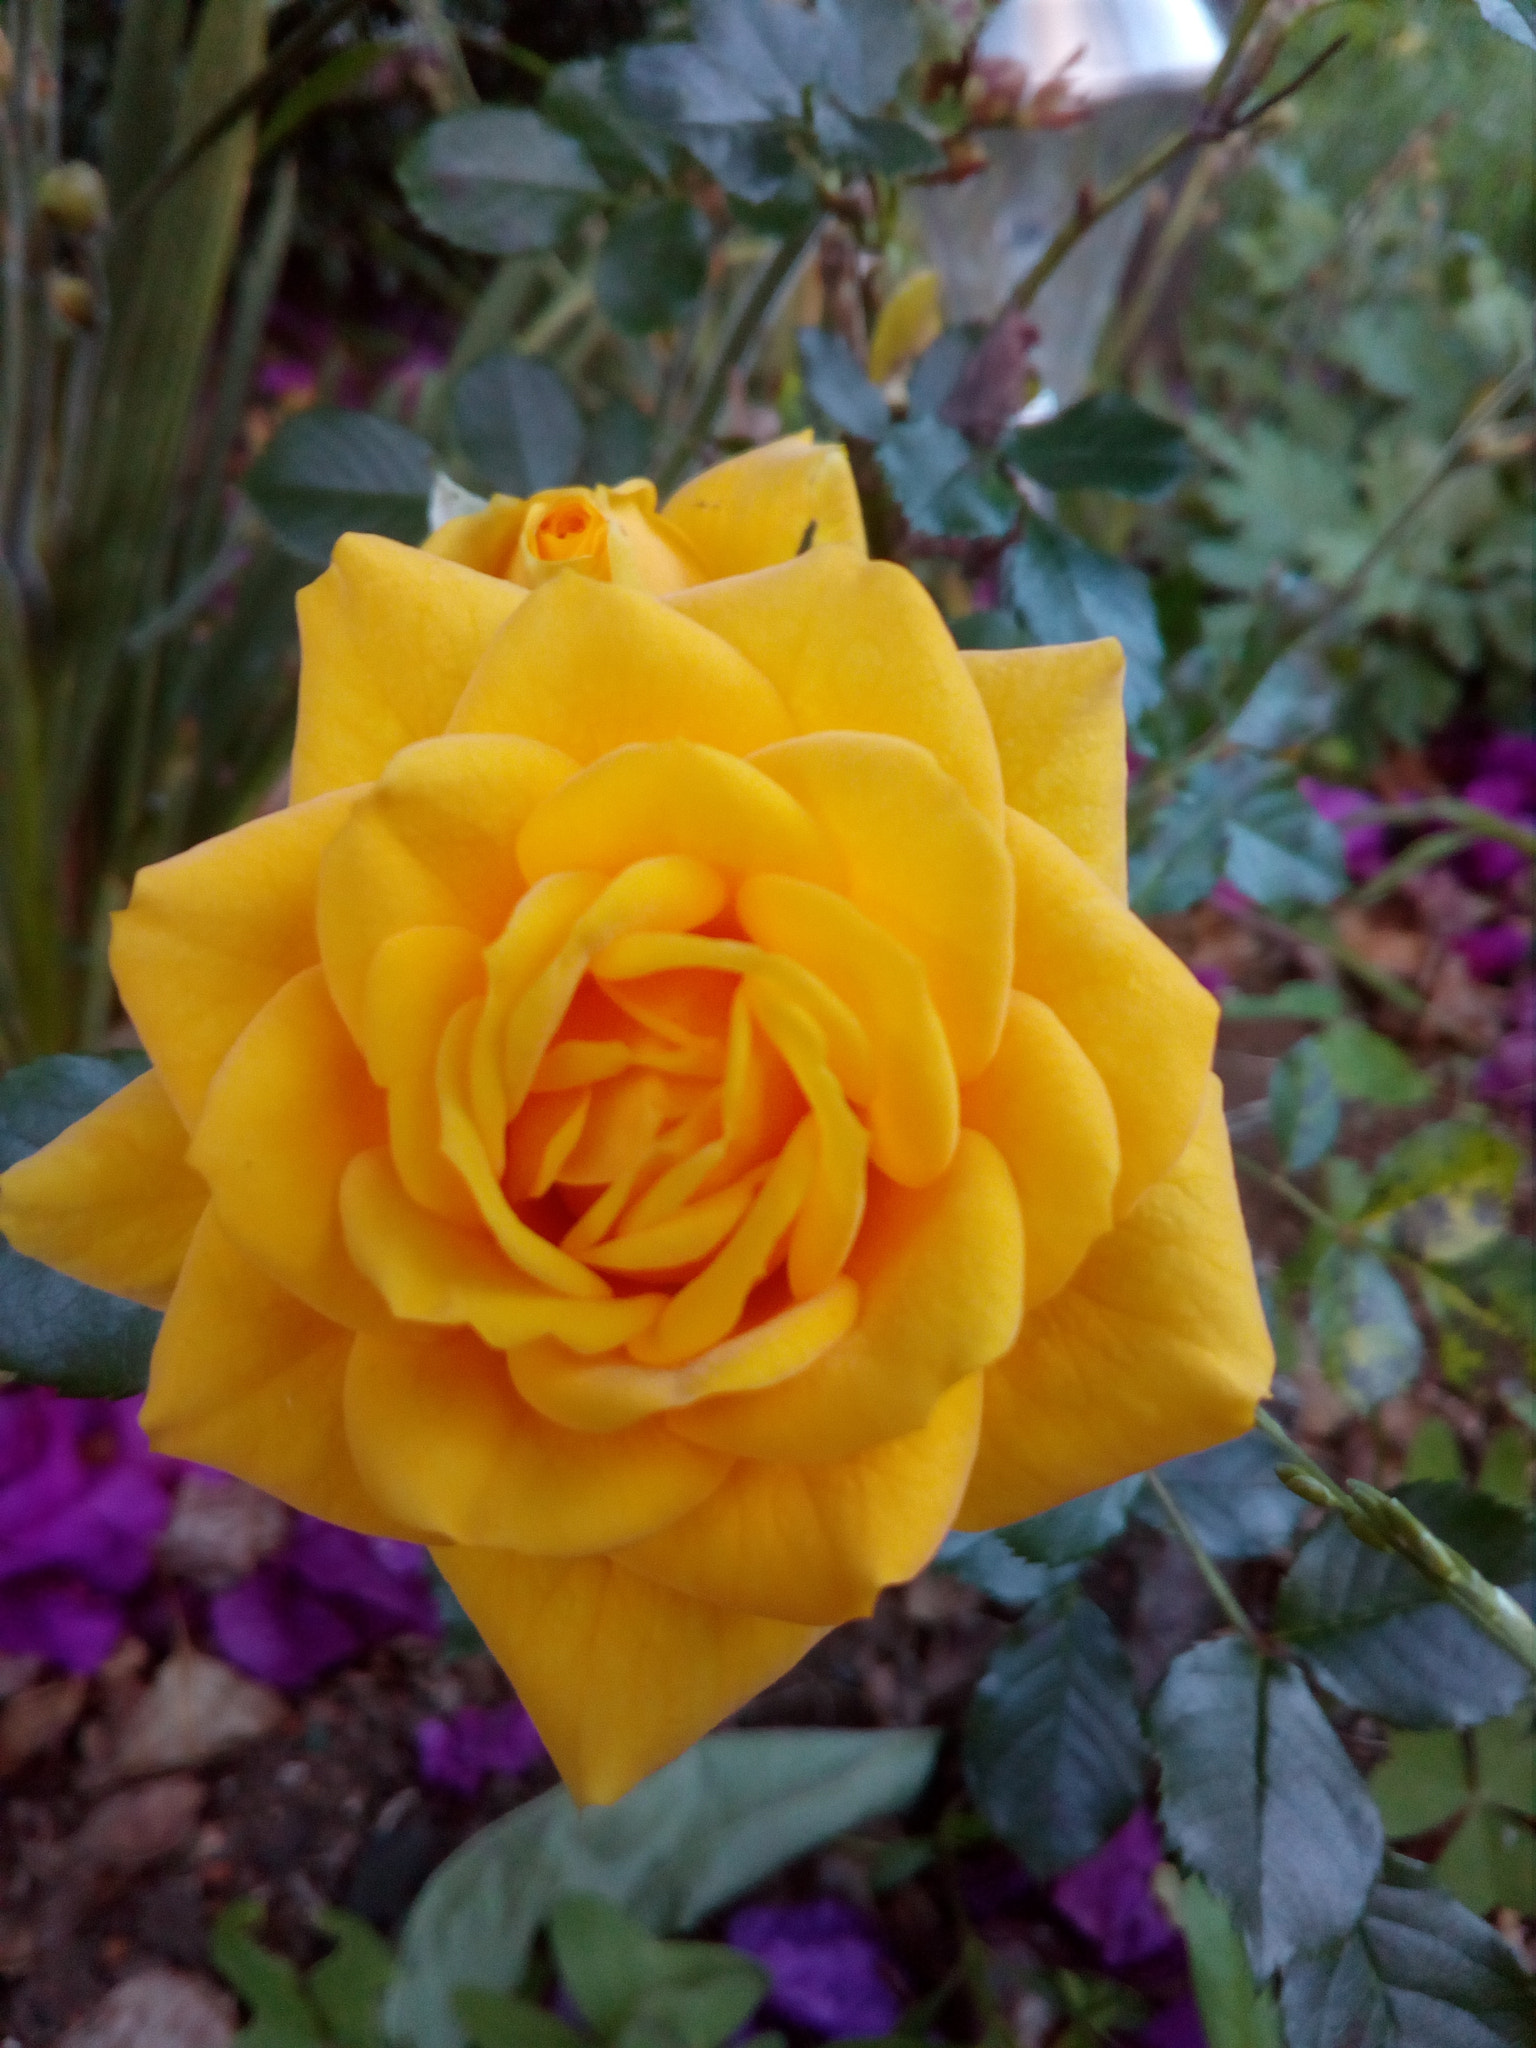 HUAWEI Y6 Elite sample photo. Turned out better than i thought #nature #rose photography